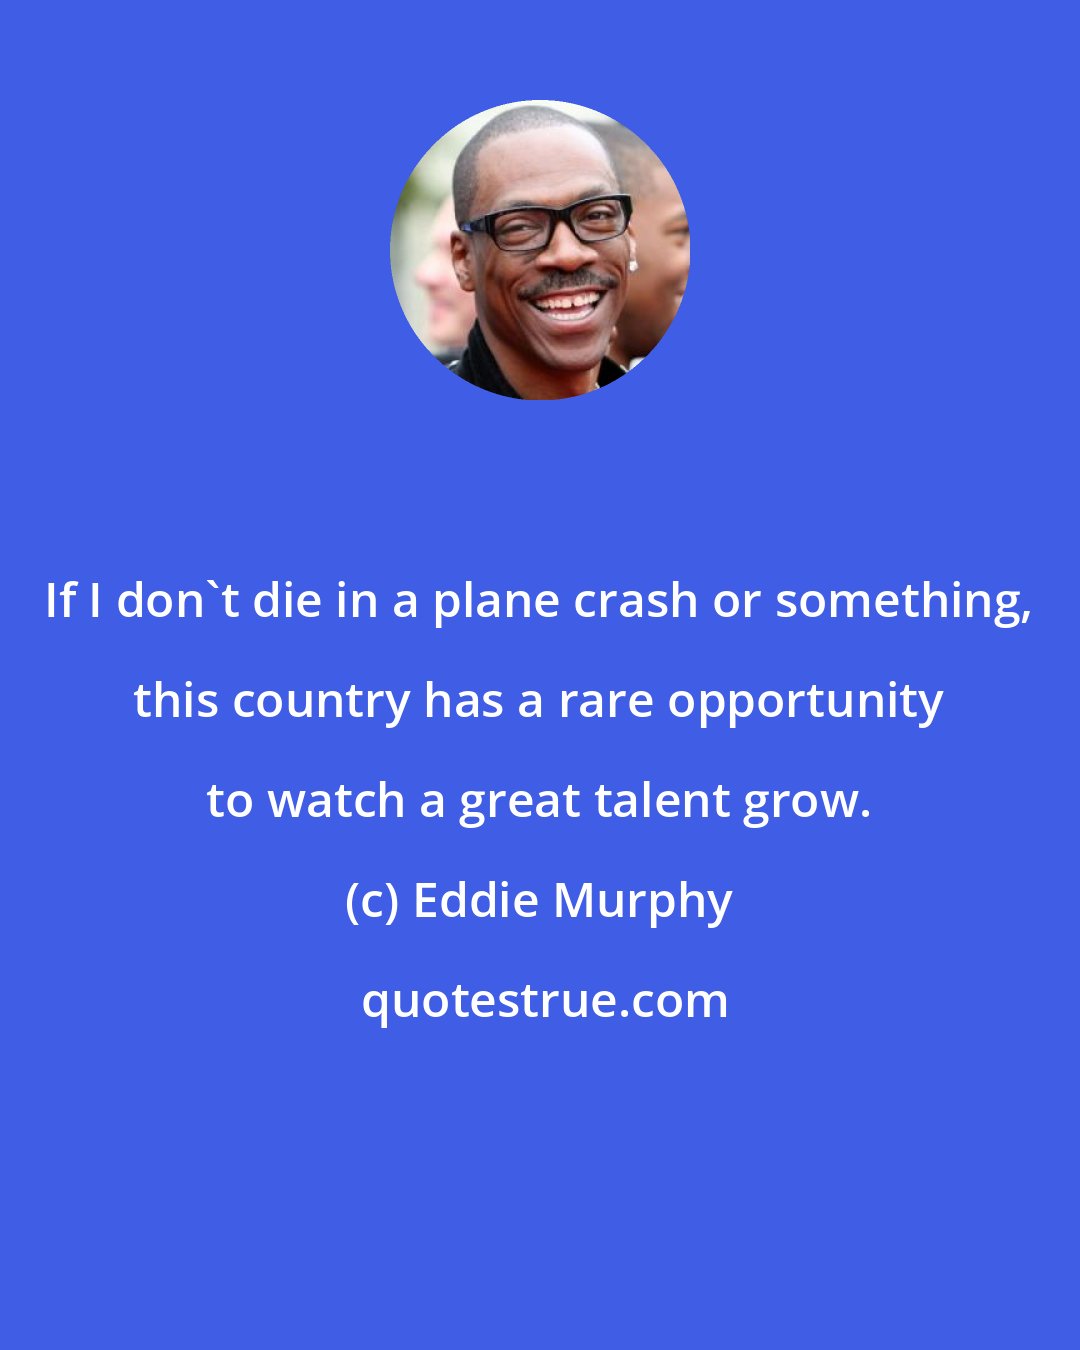 Eddie Murphy: If I don't die in a plane crash or something, this country has a rare opportunity to watch a great talent grow.